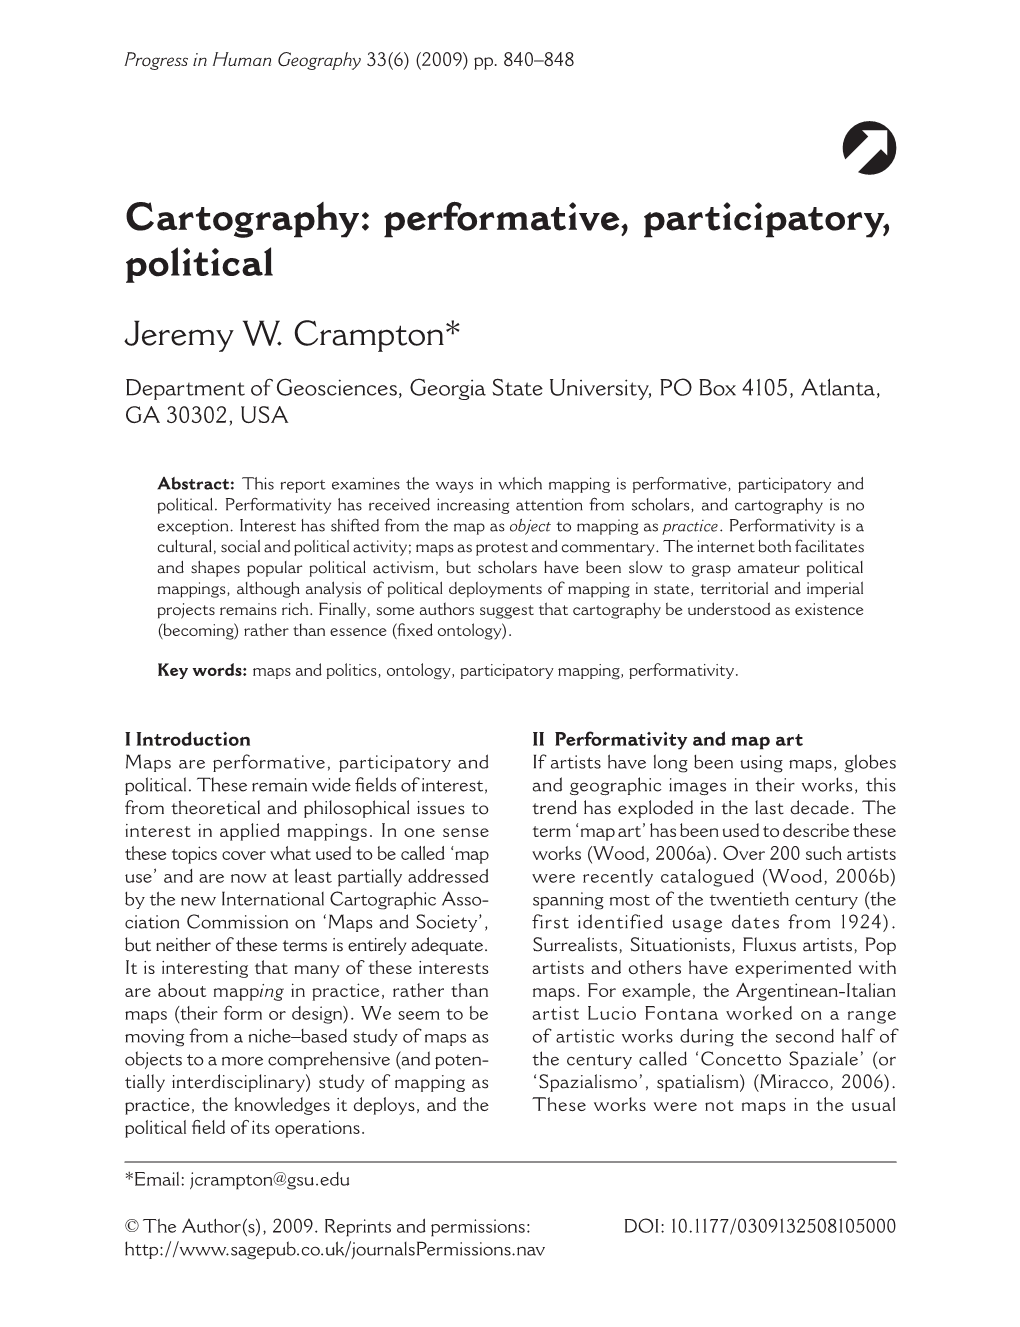 Cartography: Performative, Participatory, Political